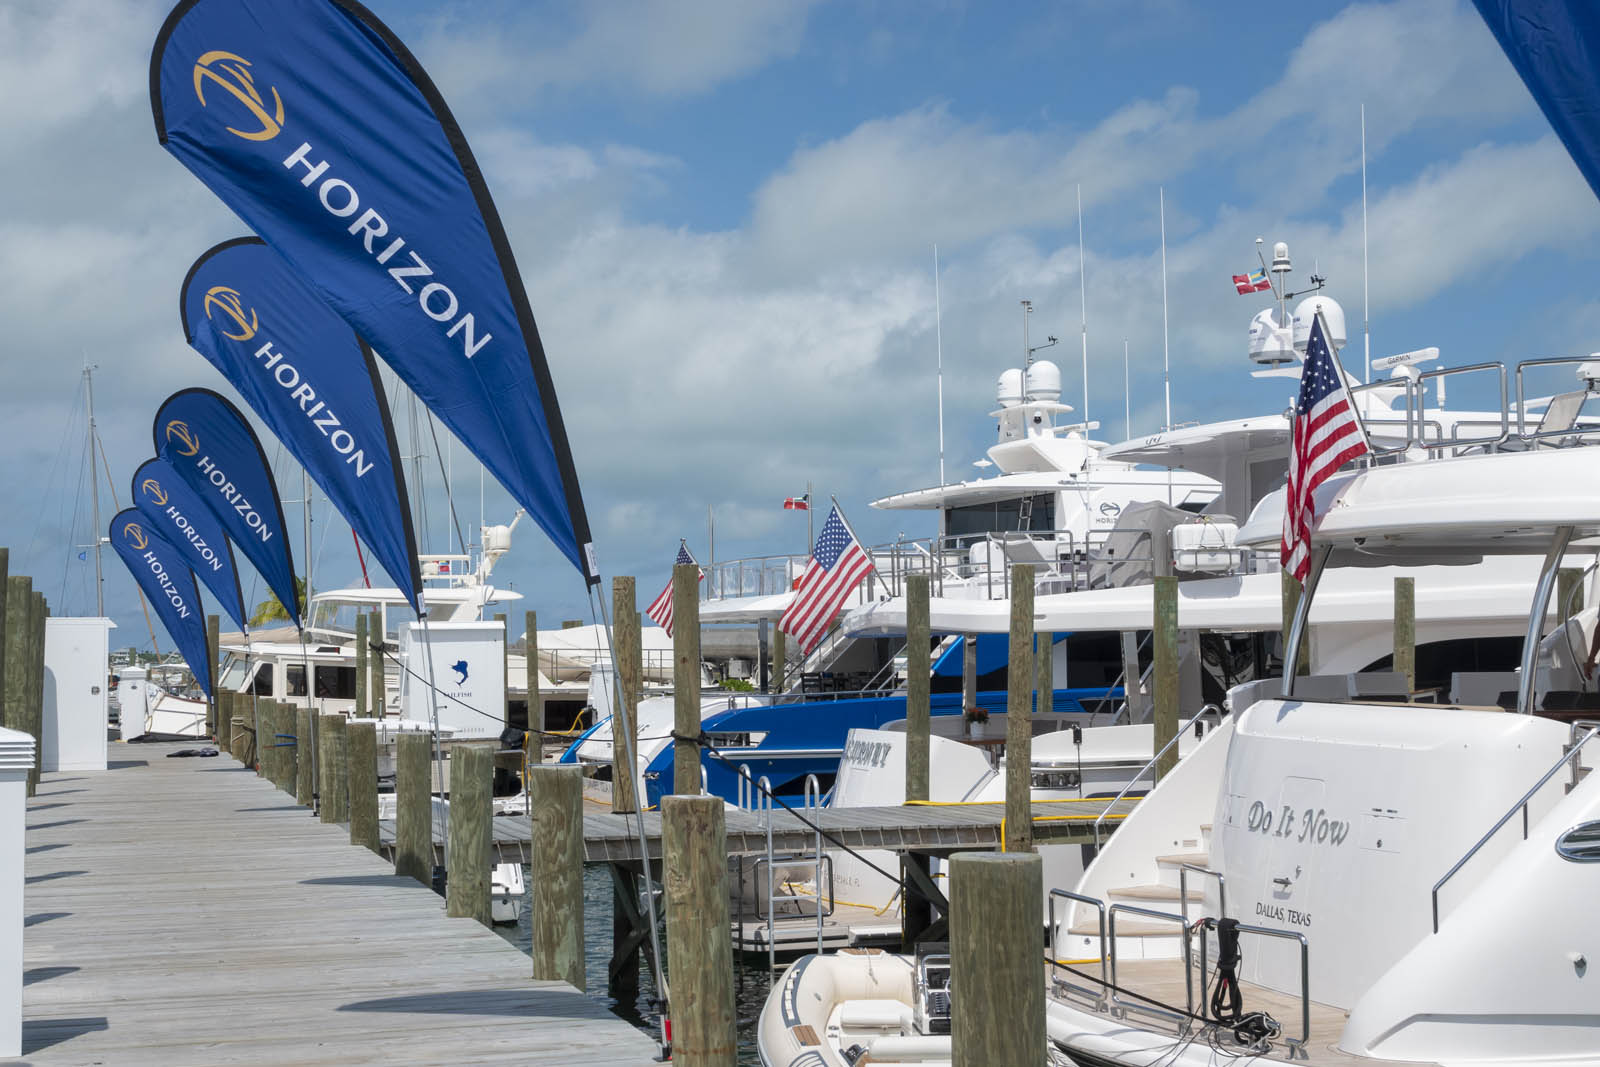 Horizon Yachts Rendezvous main dock with flags flying in front of yachts.